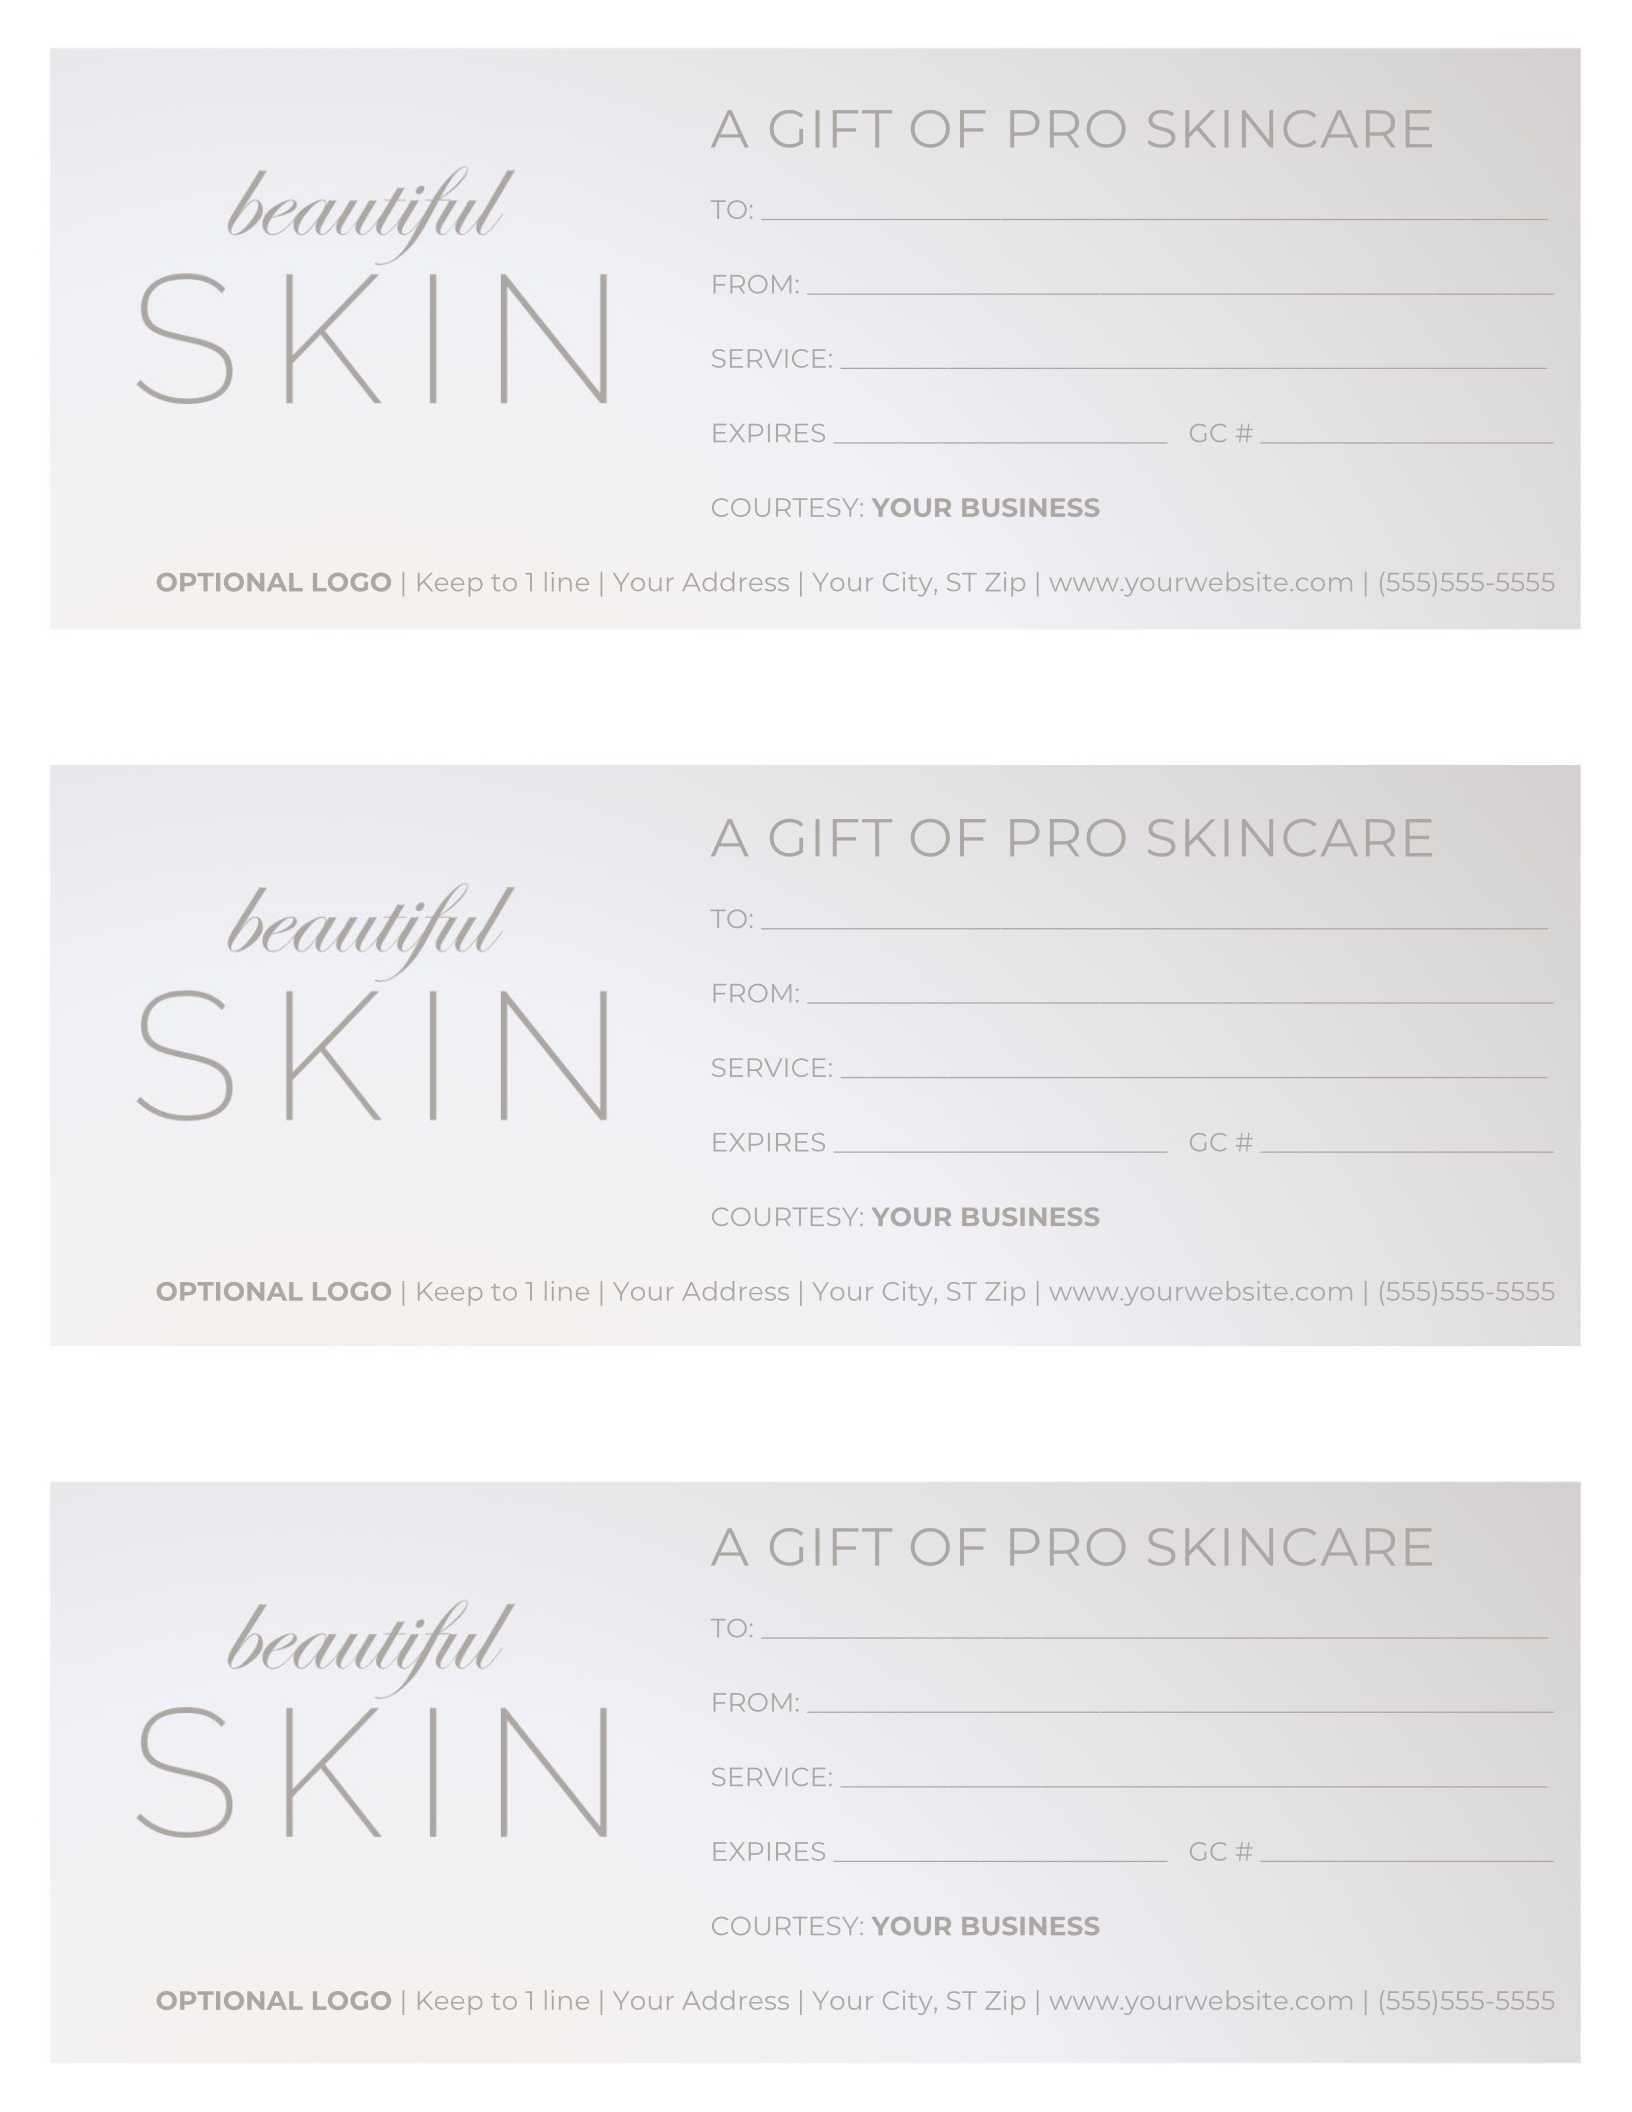 Free Gift Certificate Templates For Massage And Spa In Gift Certificate Log Template